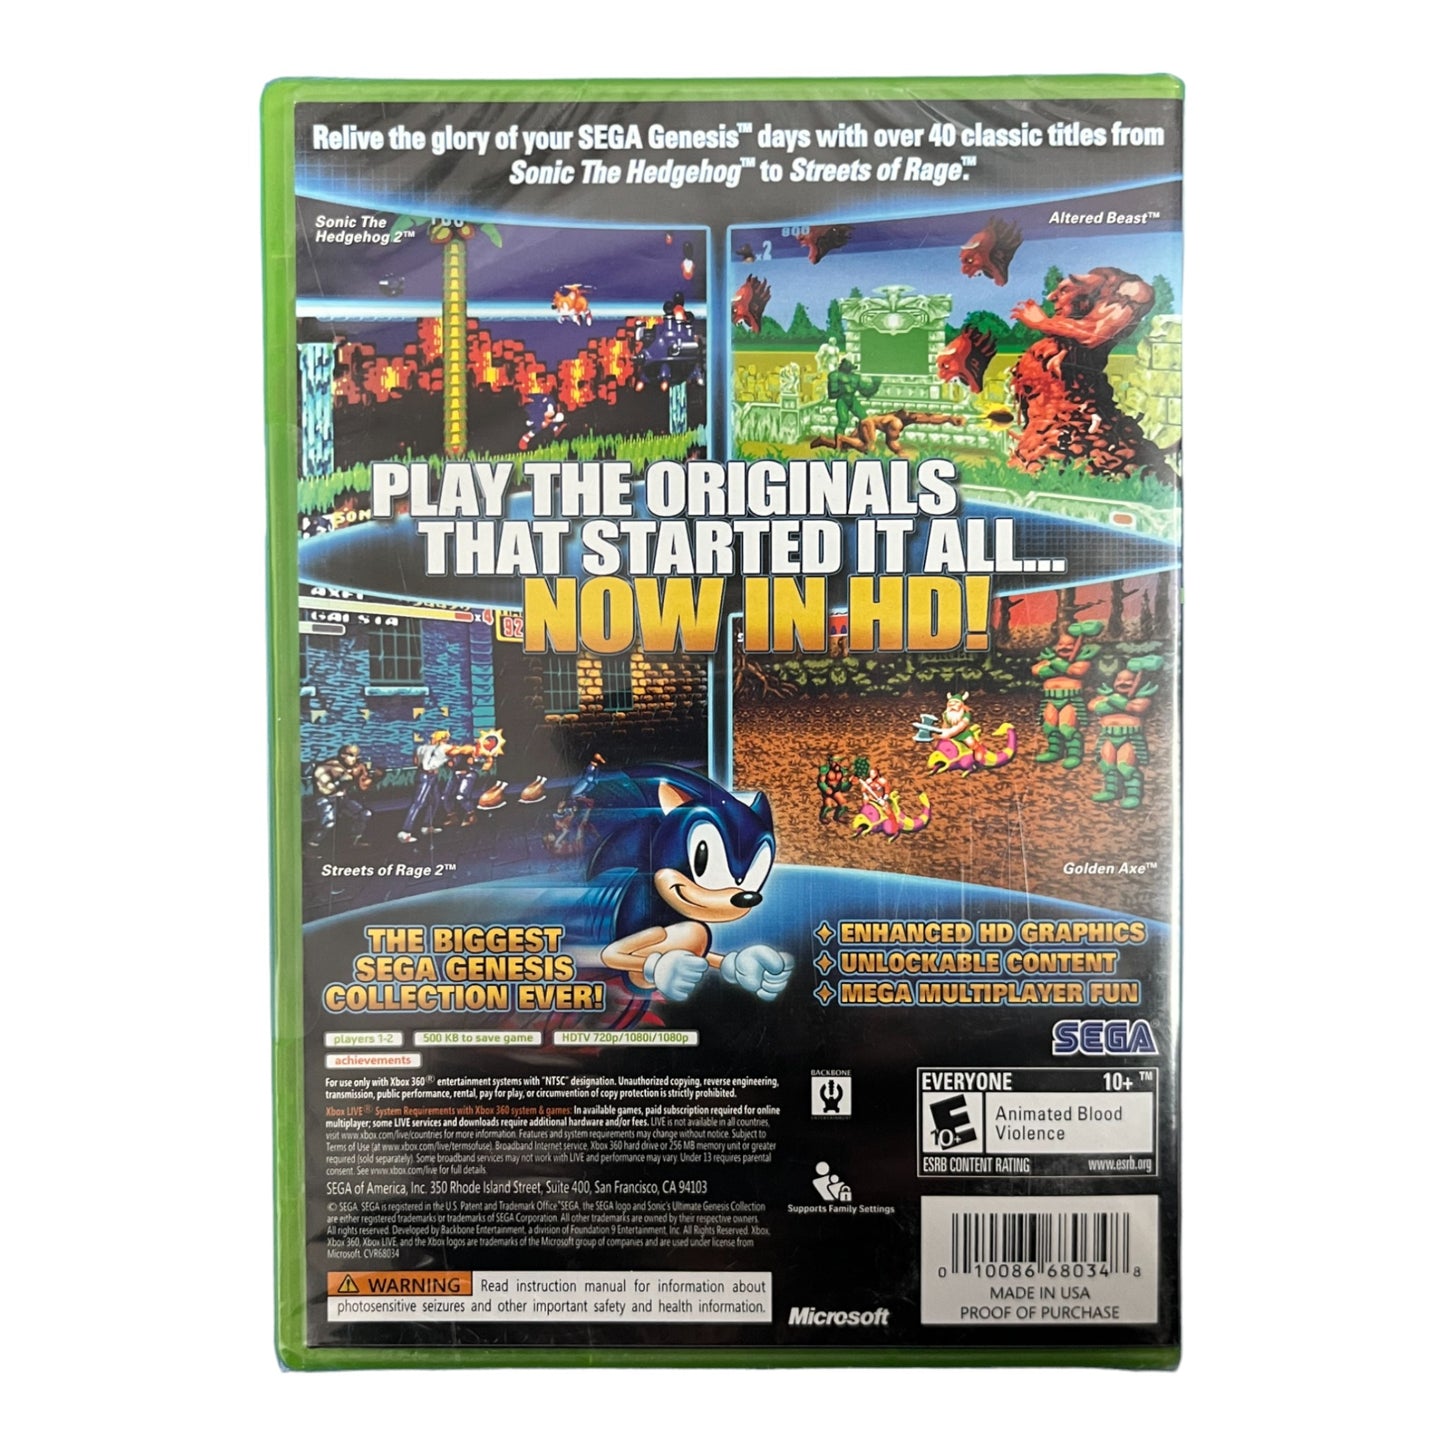 Sonic's Ultimate Genesis Collection (Xbox360)